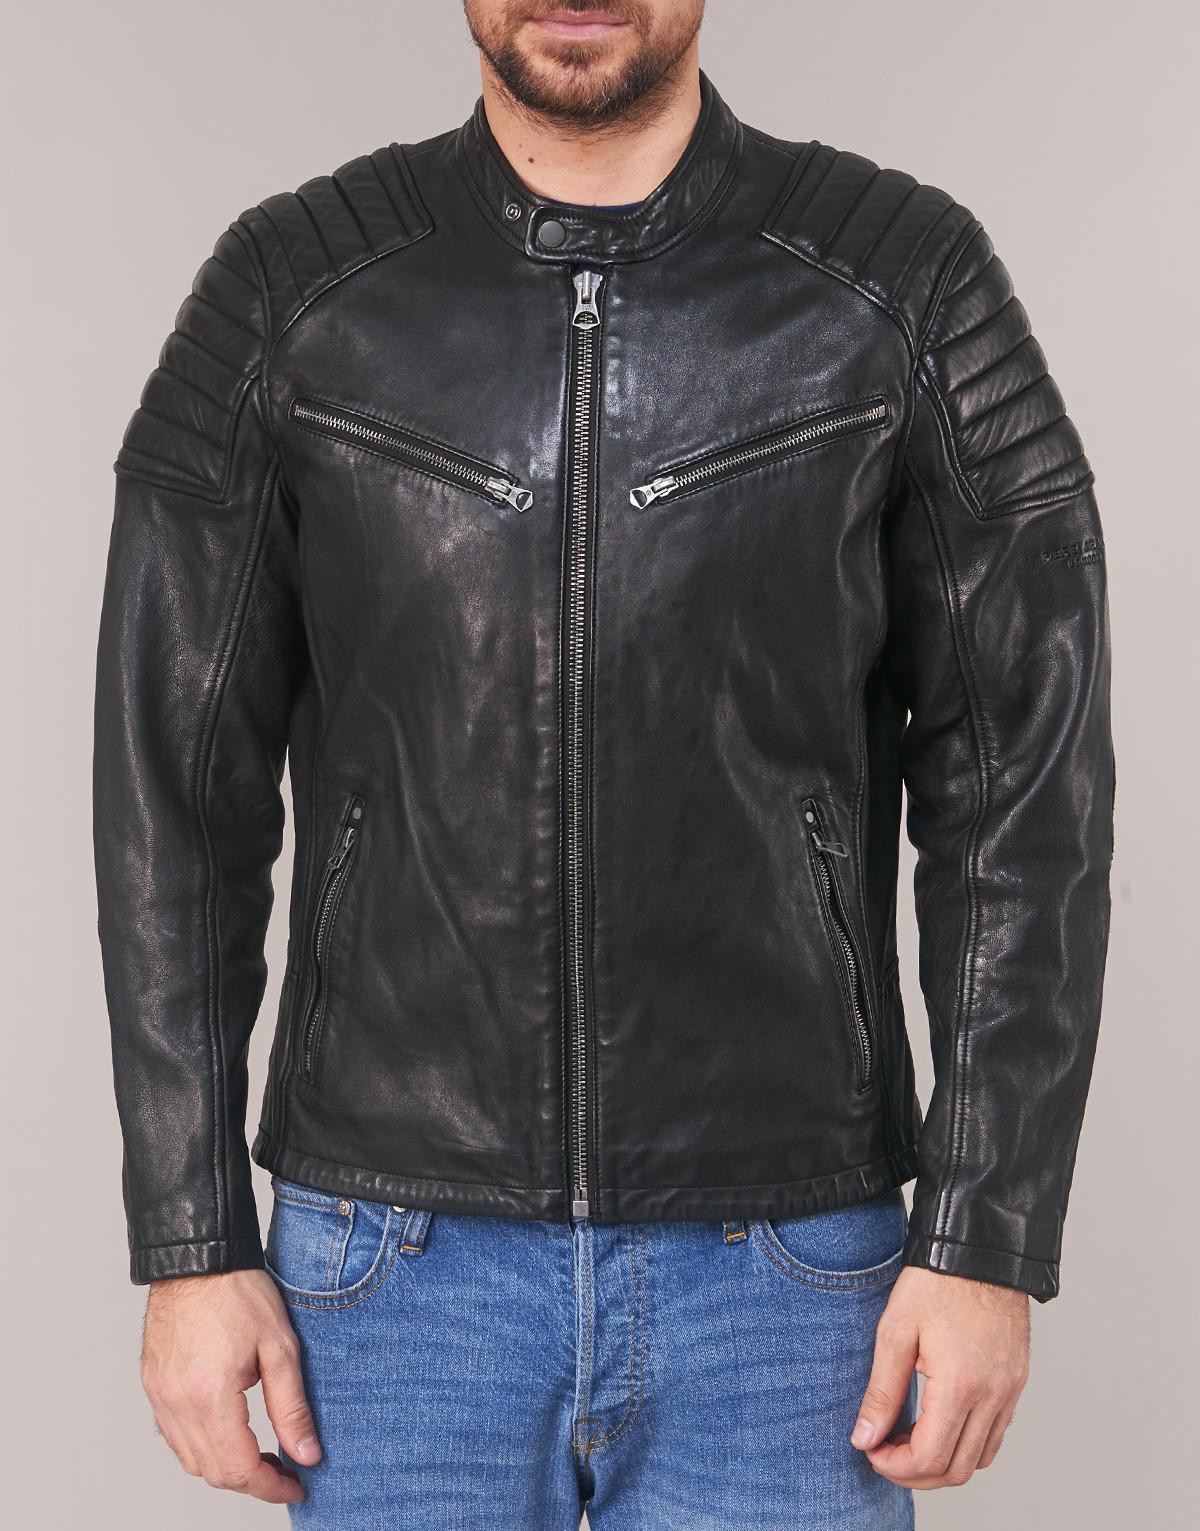 Pepe Jeans Keith Summer Leather Jacket in Black for Men - Lyst